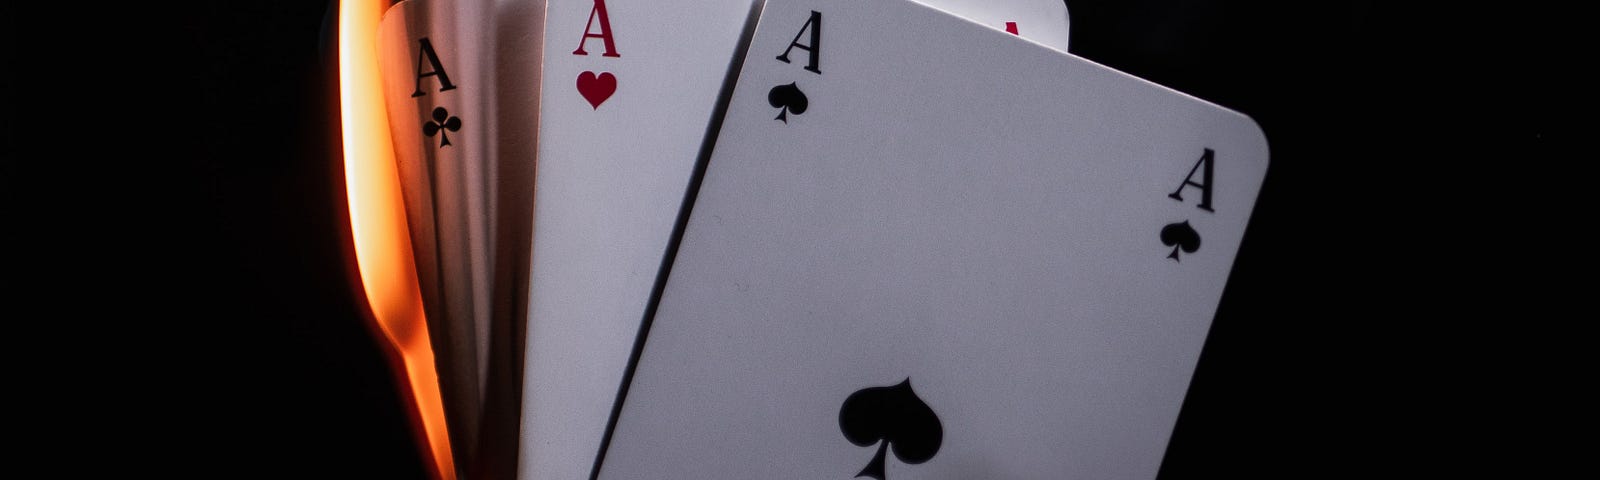 A collection of burning poker cards, showing aces, float in the air over an open hand.